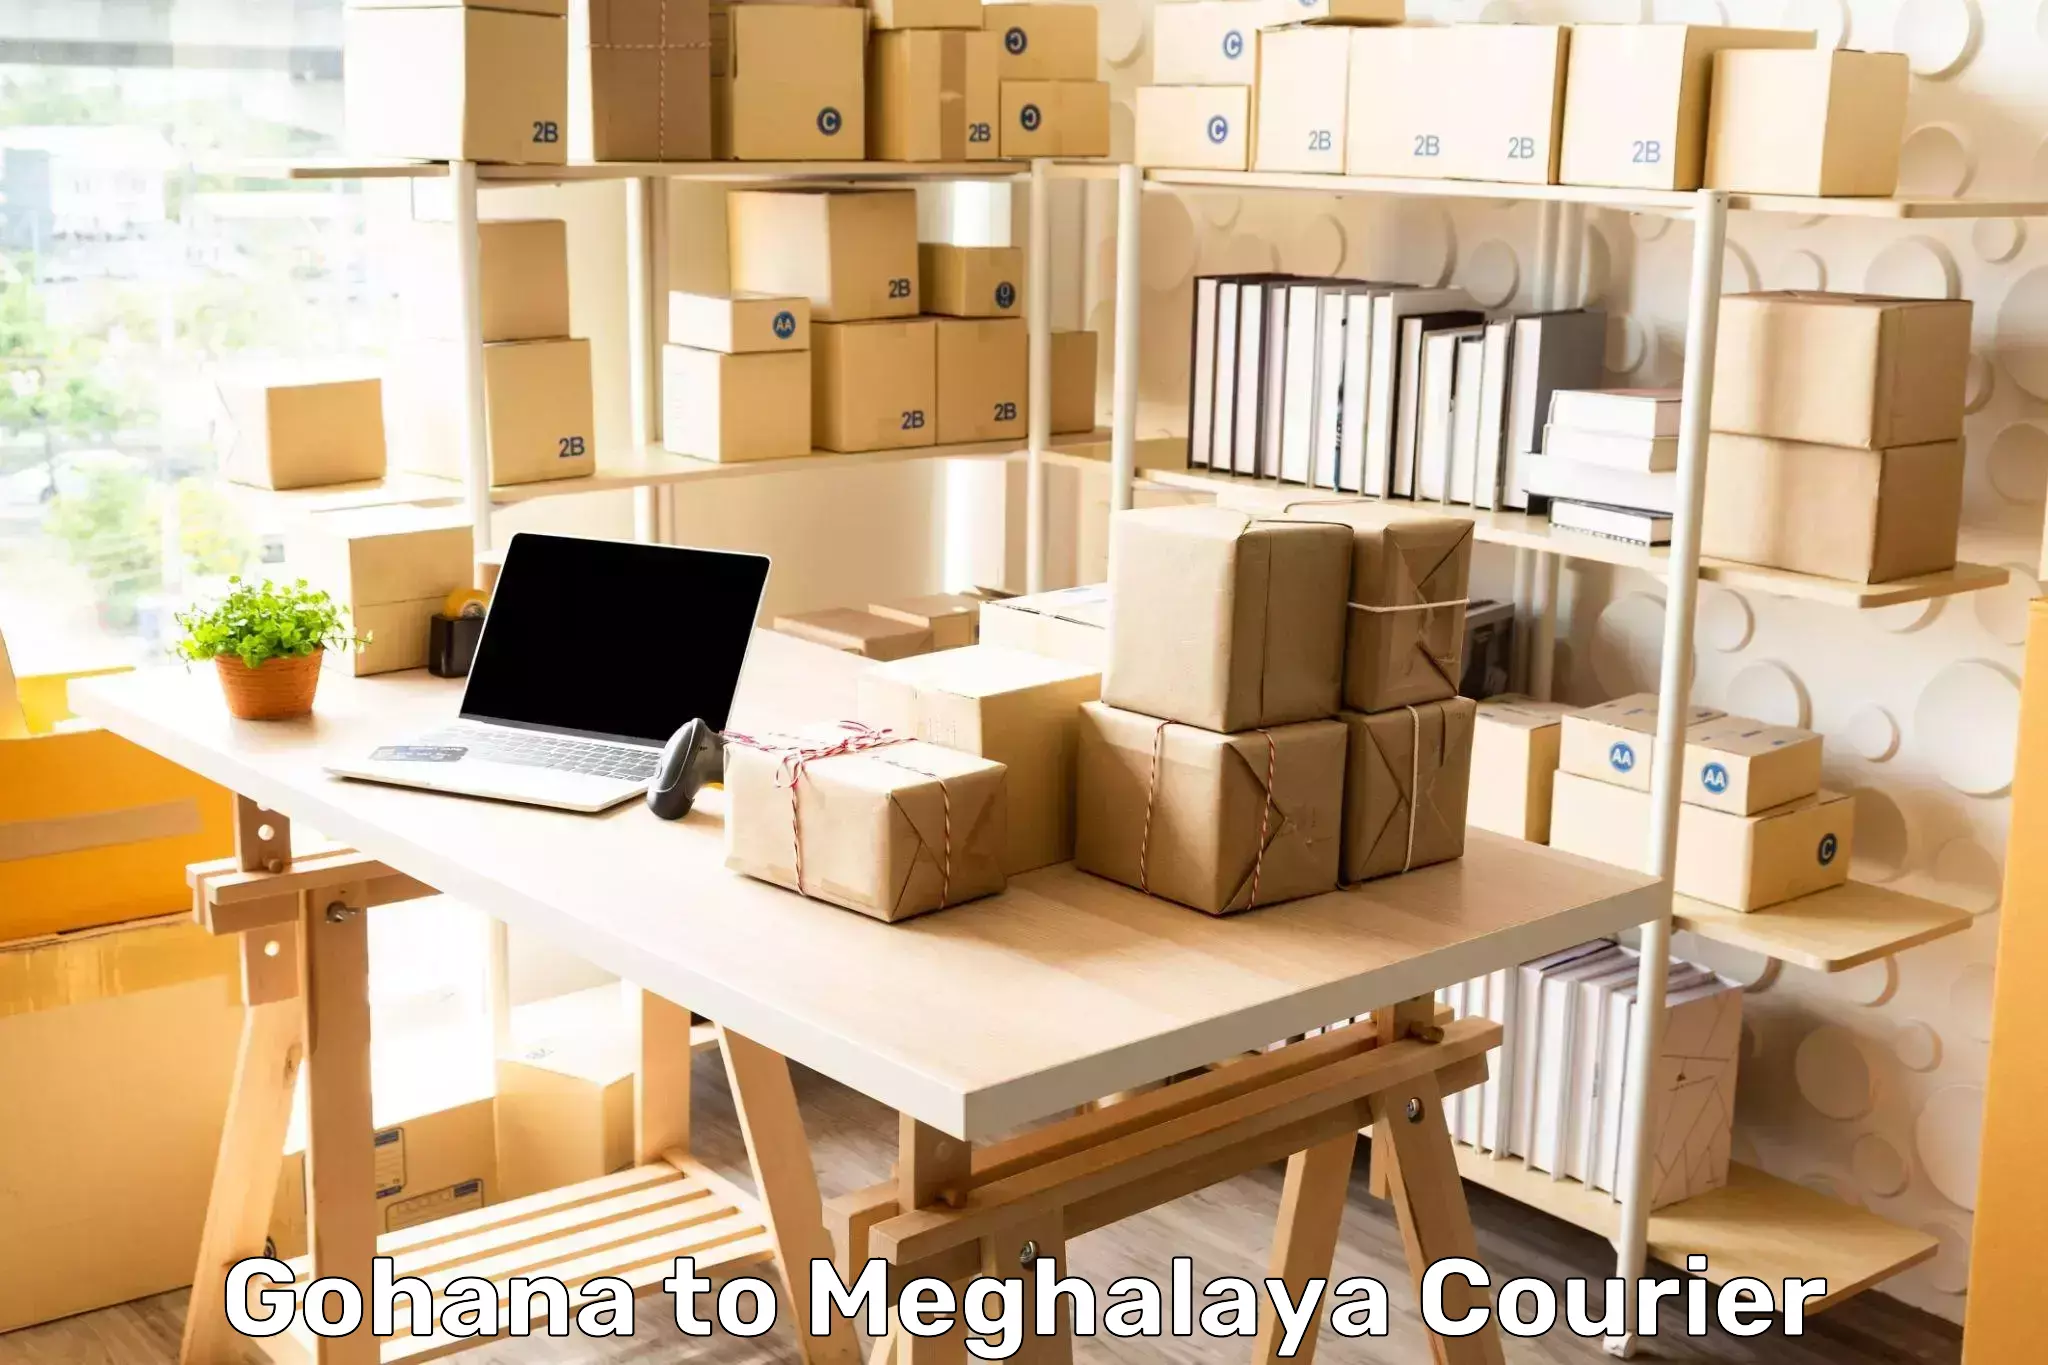 Full-service courier options Gohana to Dkhiah West